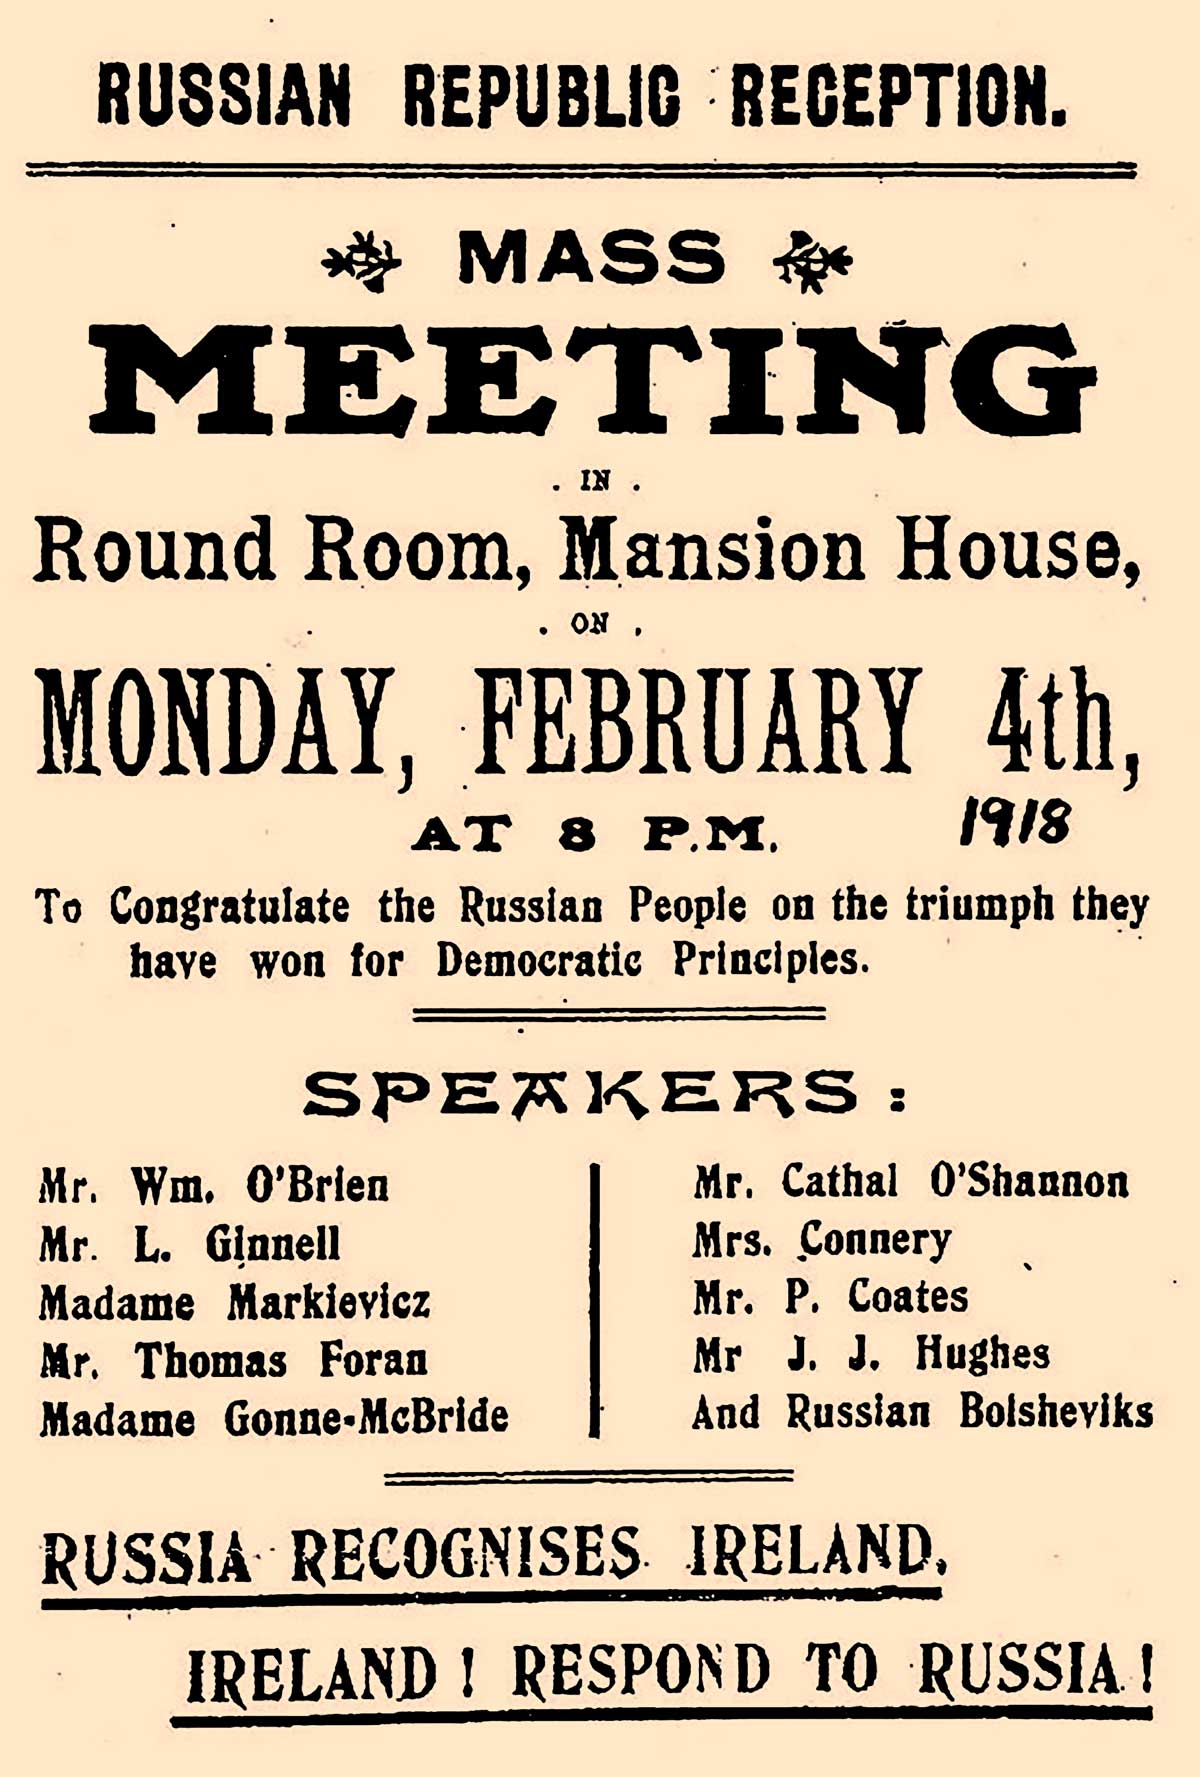 Advertisement for the Russian Republic Reception at Mansion House, with speakers including Constance Markievicz and ‘Russian Bolsheviks’, February 1918.